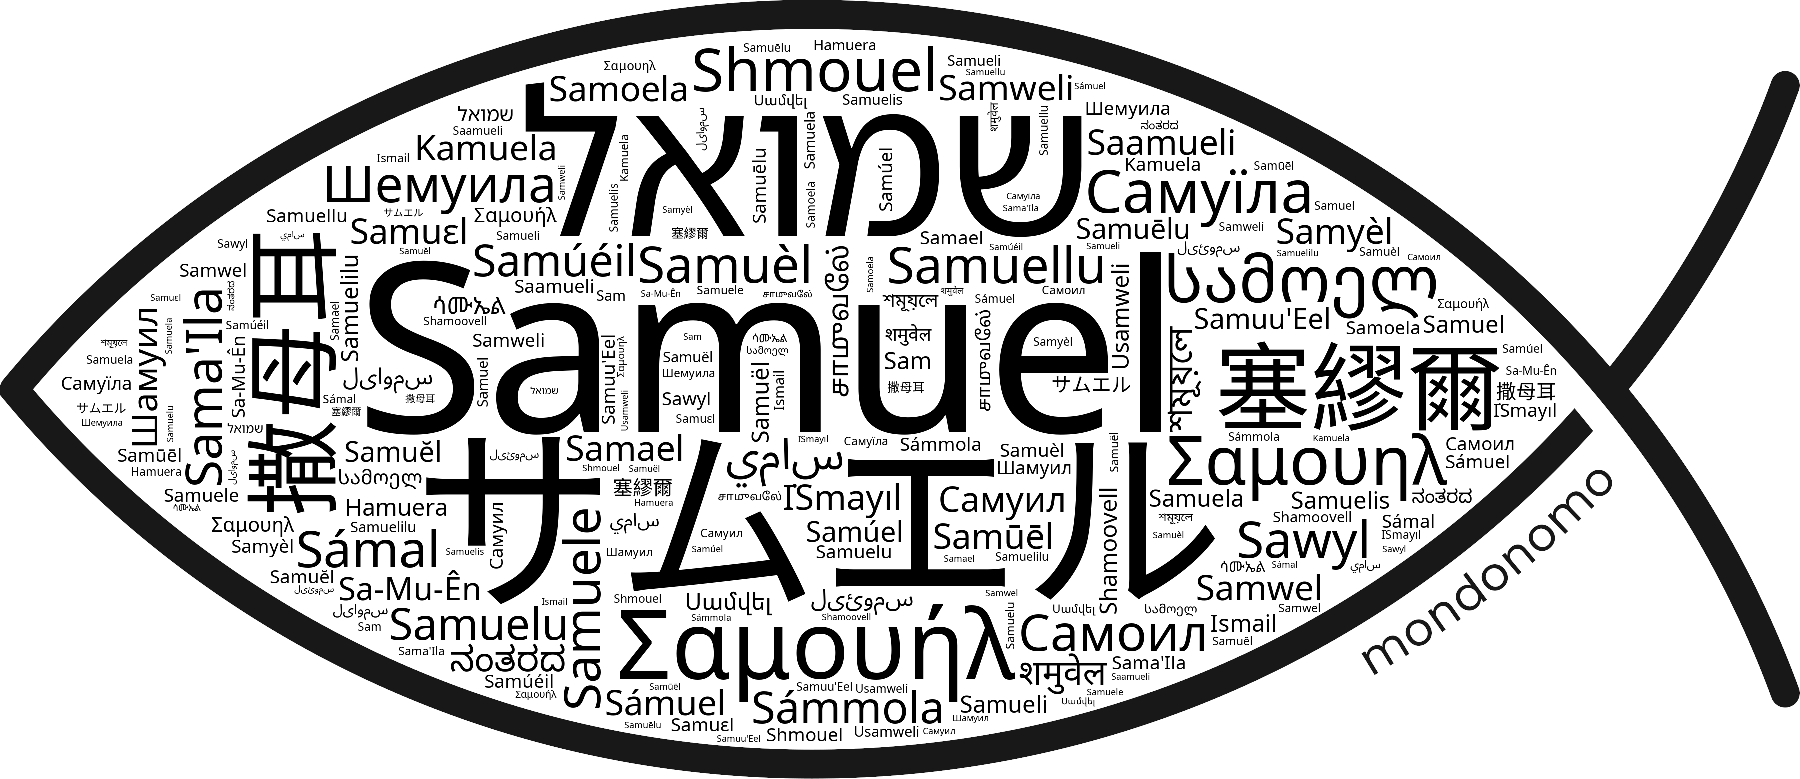 Name Samuel in the world's Bibles